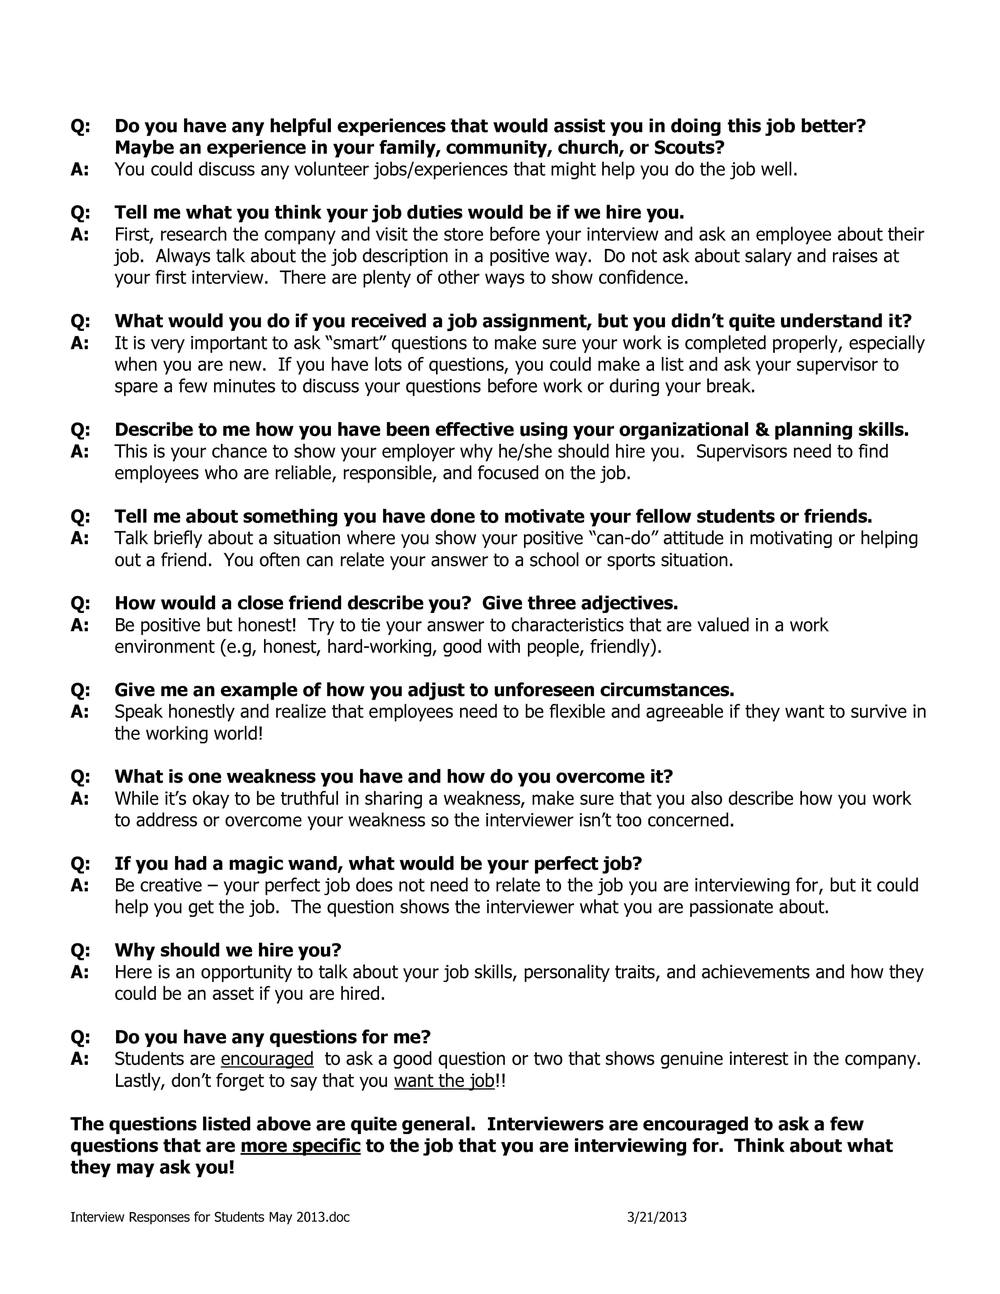 job interview questions with sample responses